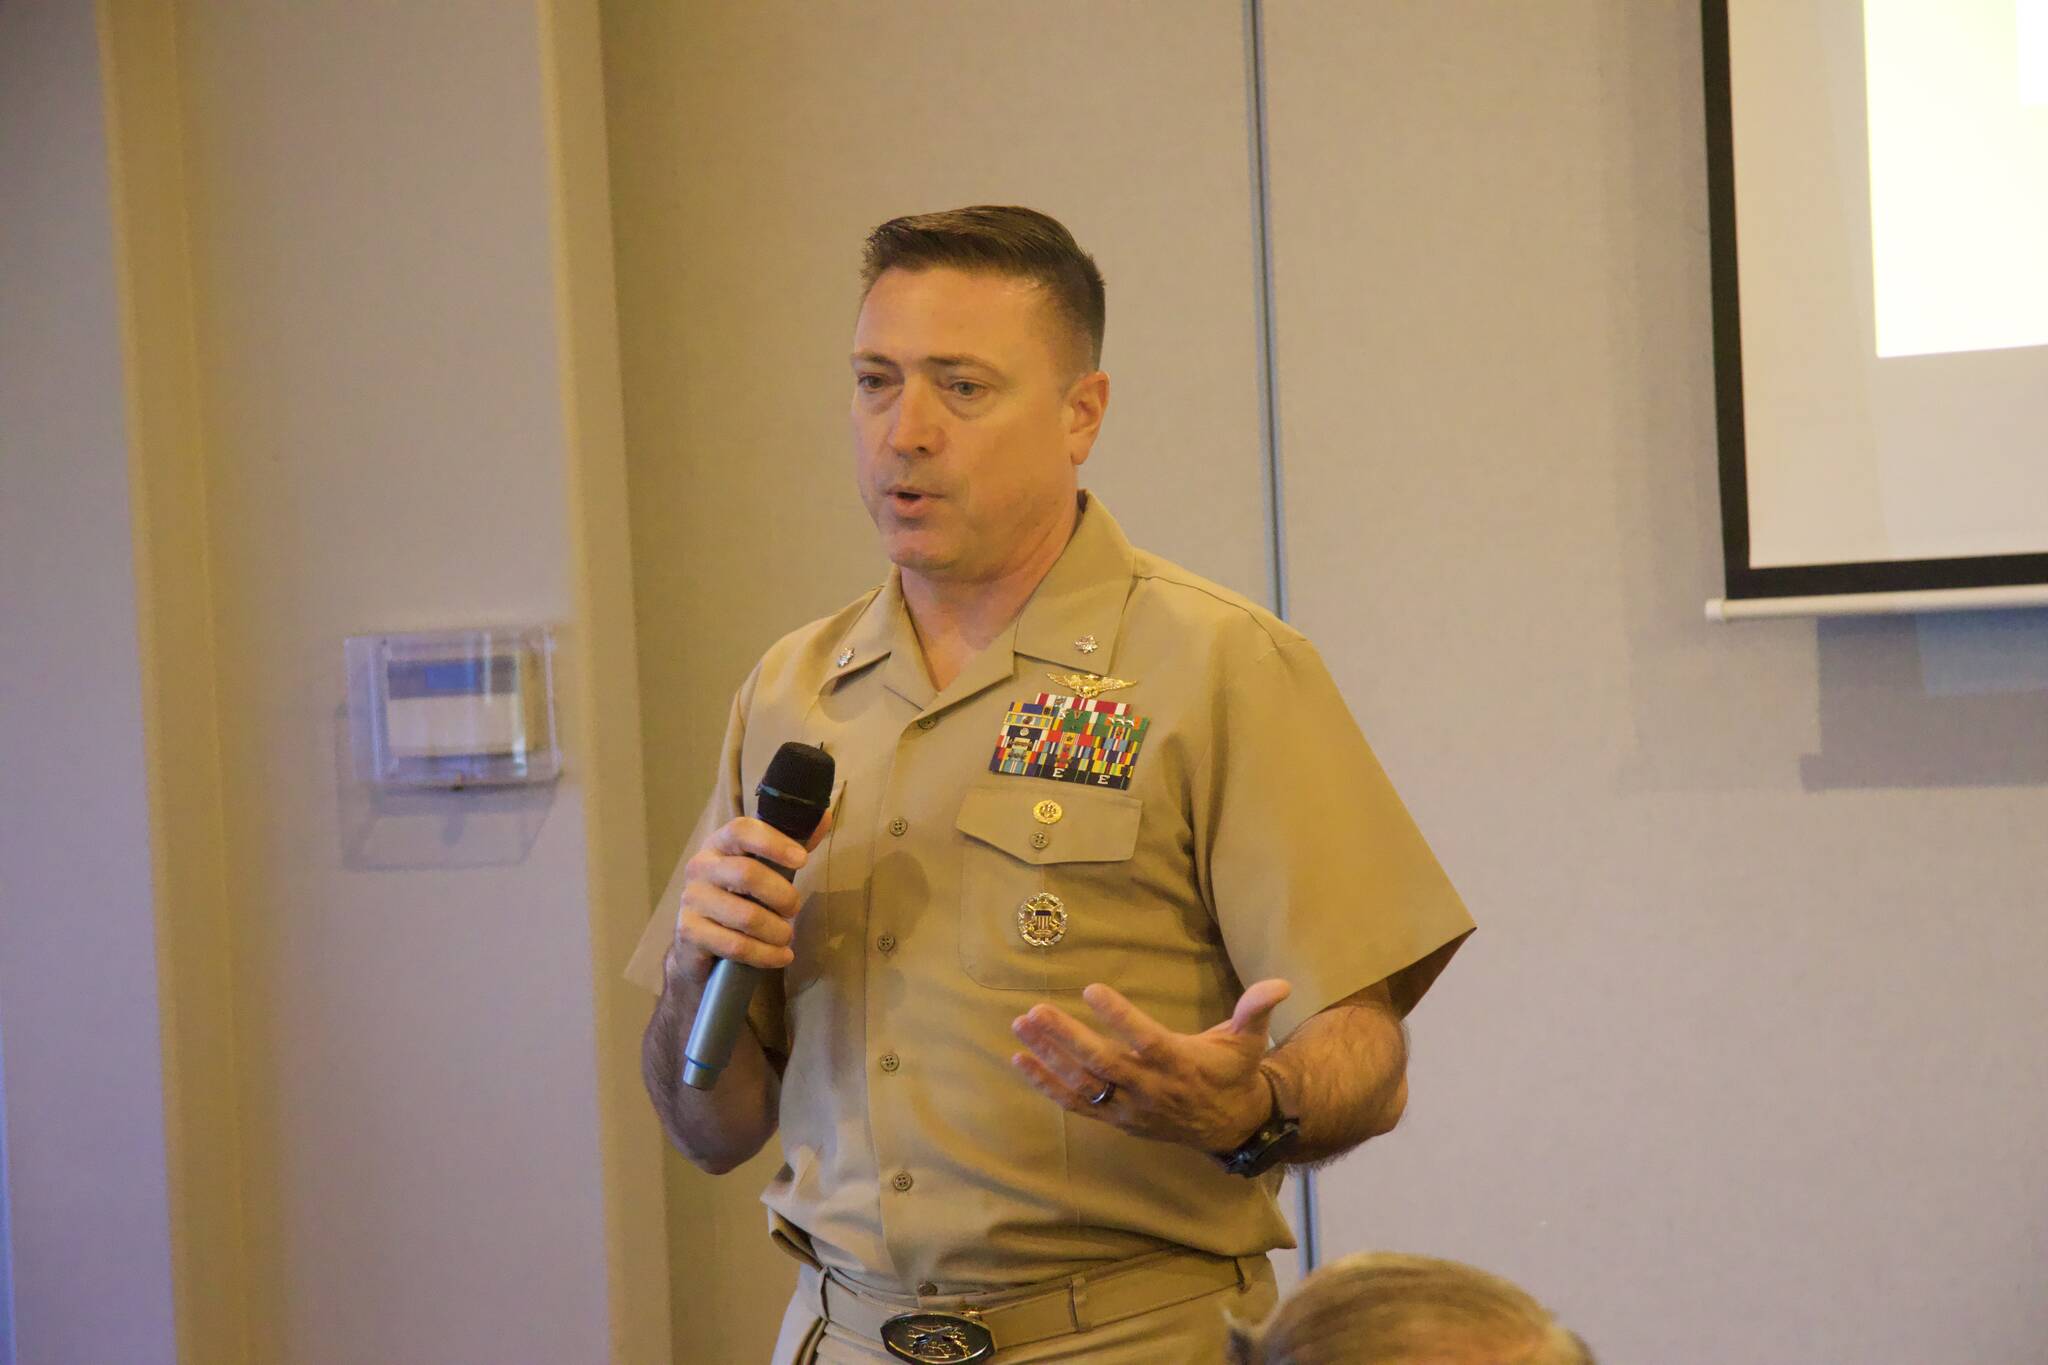 Photo by Rachel Rosen/Whidbey News-Times
Cmdr. Tim Oswald, executive officer of Naval Air Station Whidbey Island, gave a talk on China’s global influence at the Military Officers Association’s January meeting.